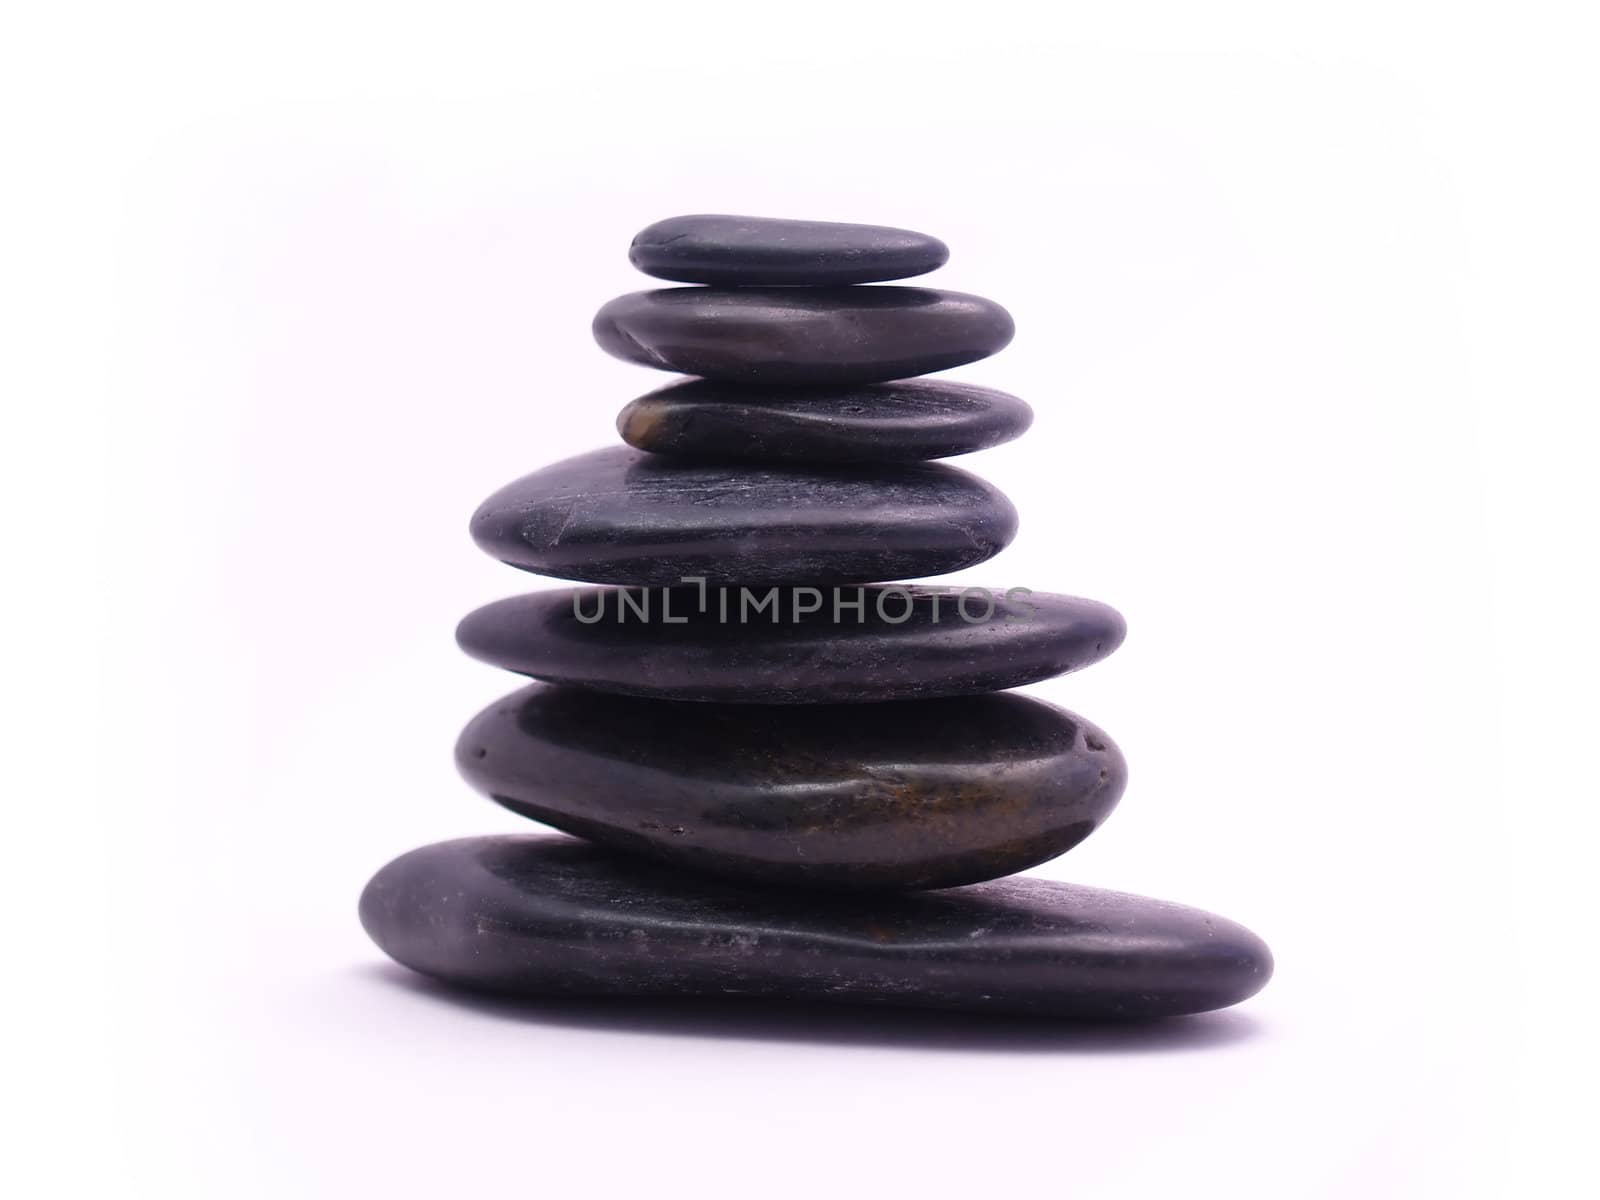 Seven smooth black stones in a stack